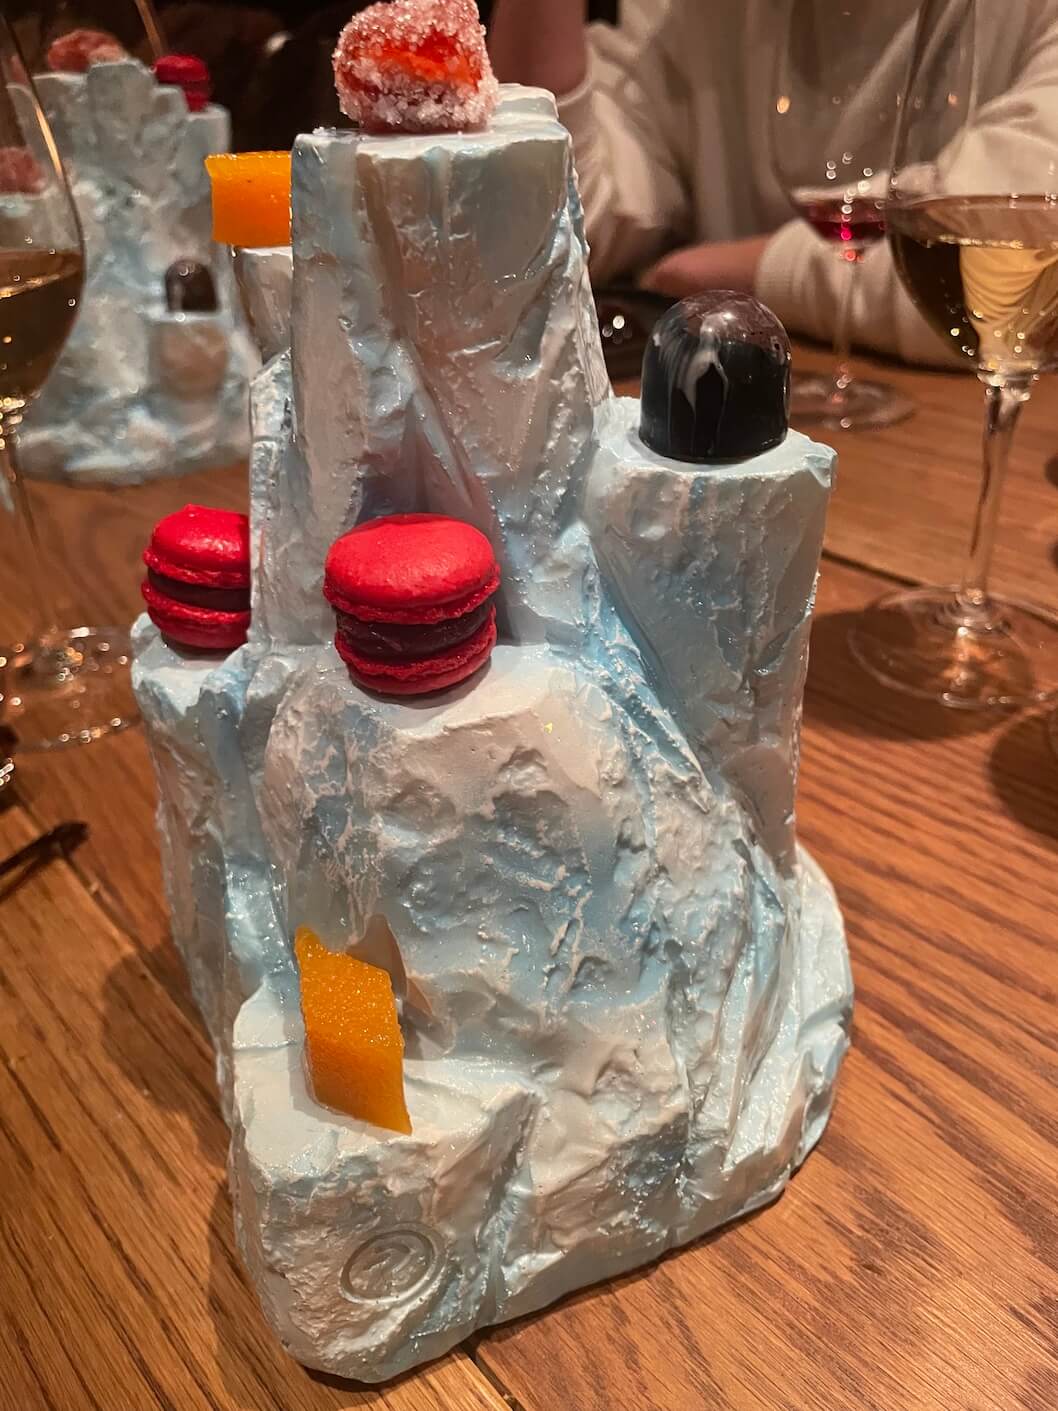 The petits fours were served on a blue iceberg